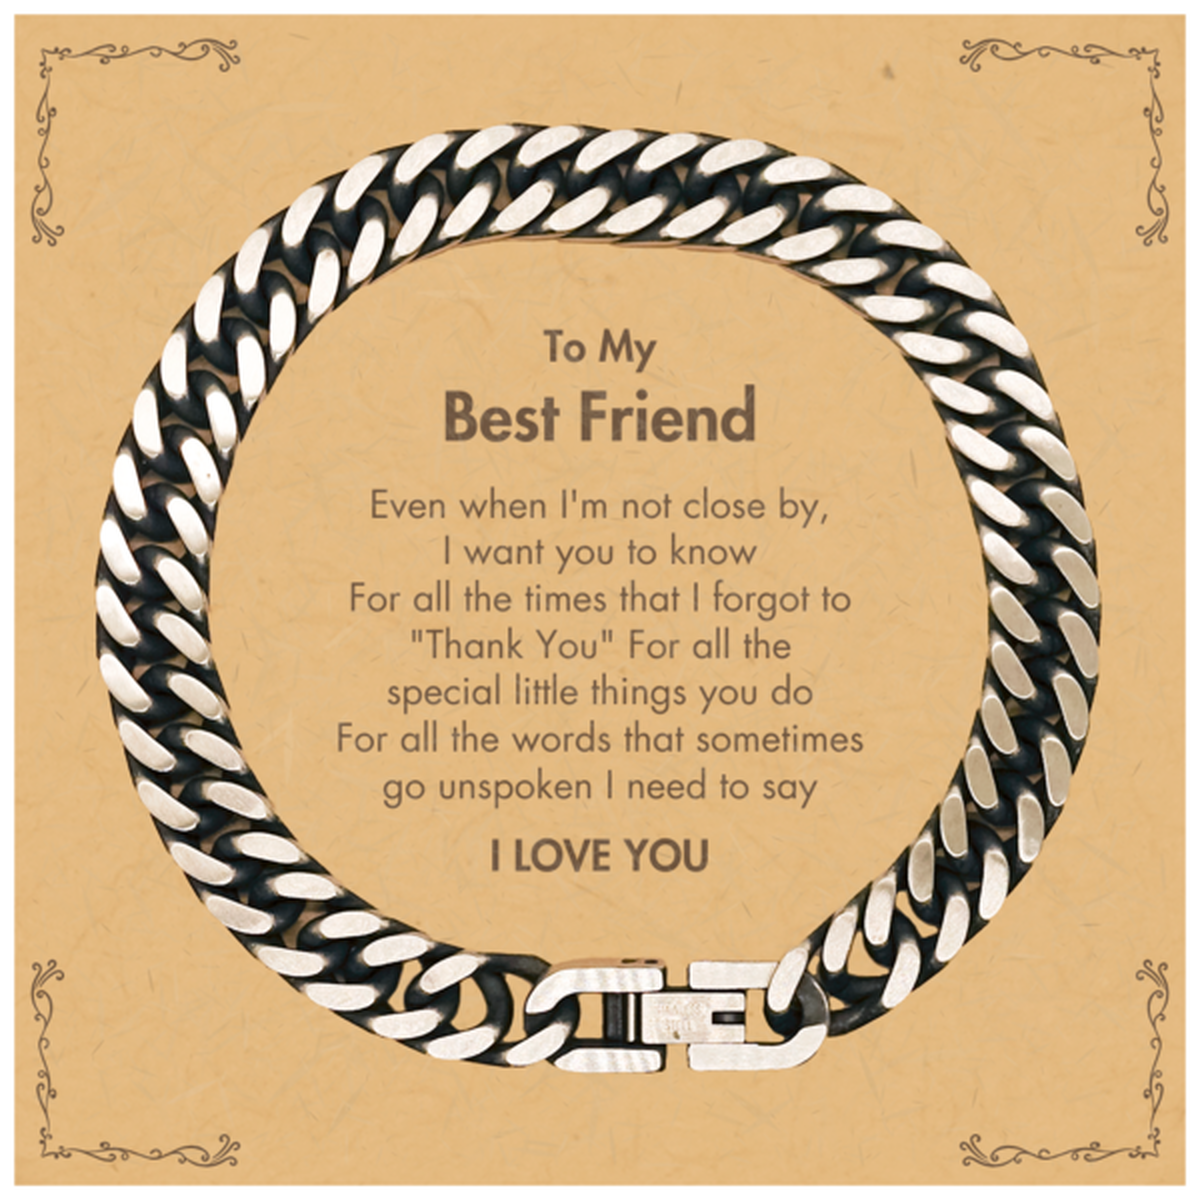 Thank You Gifts for Best Friend, Keepsake Cuban Link Chain Bracelet Gifts for Best Friend Birthday Mother's day Father's Day Best Friend For all the words That sometimes go unspoken I need to say I LOVE YOU